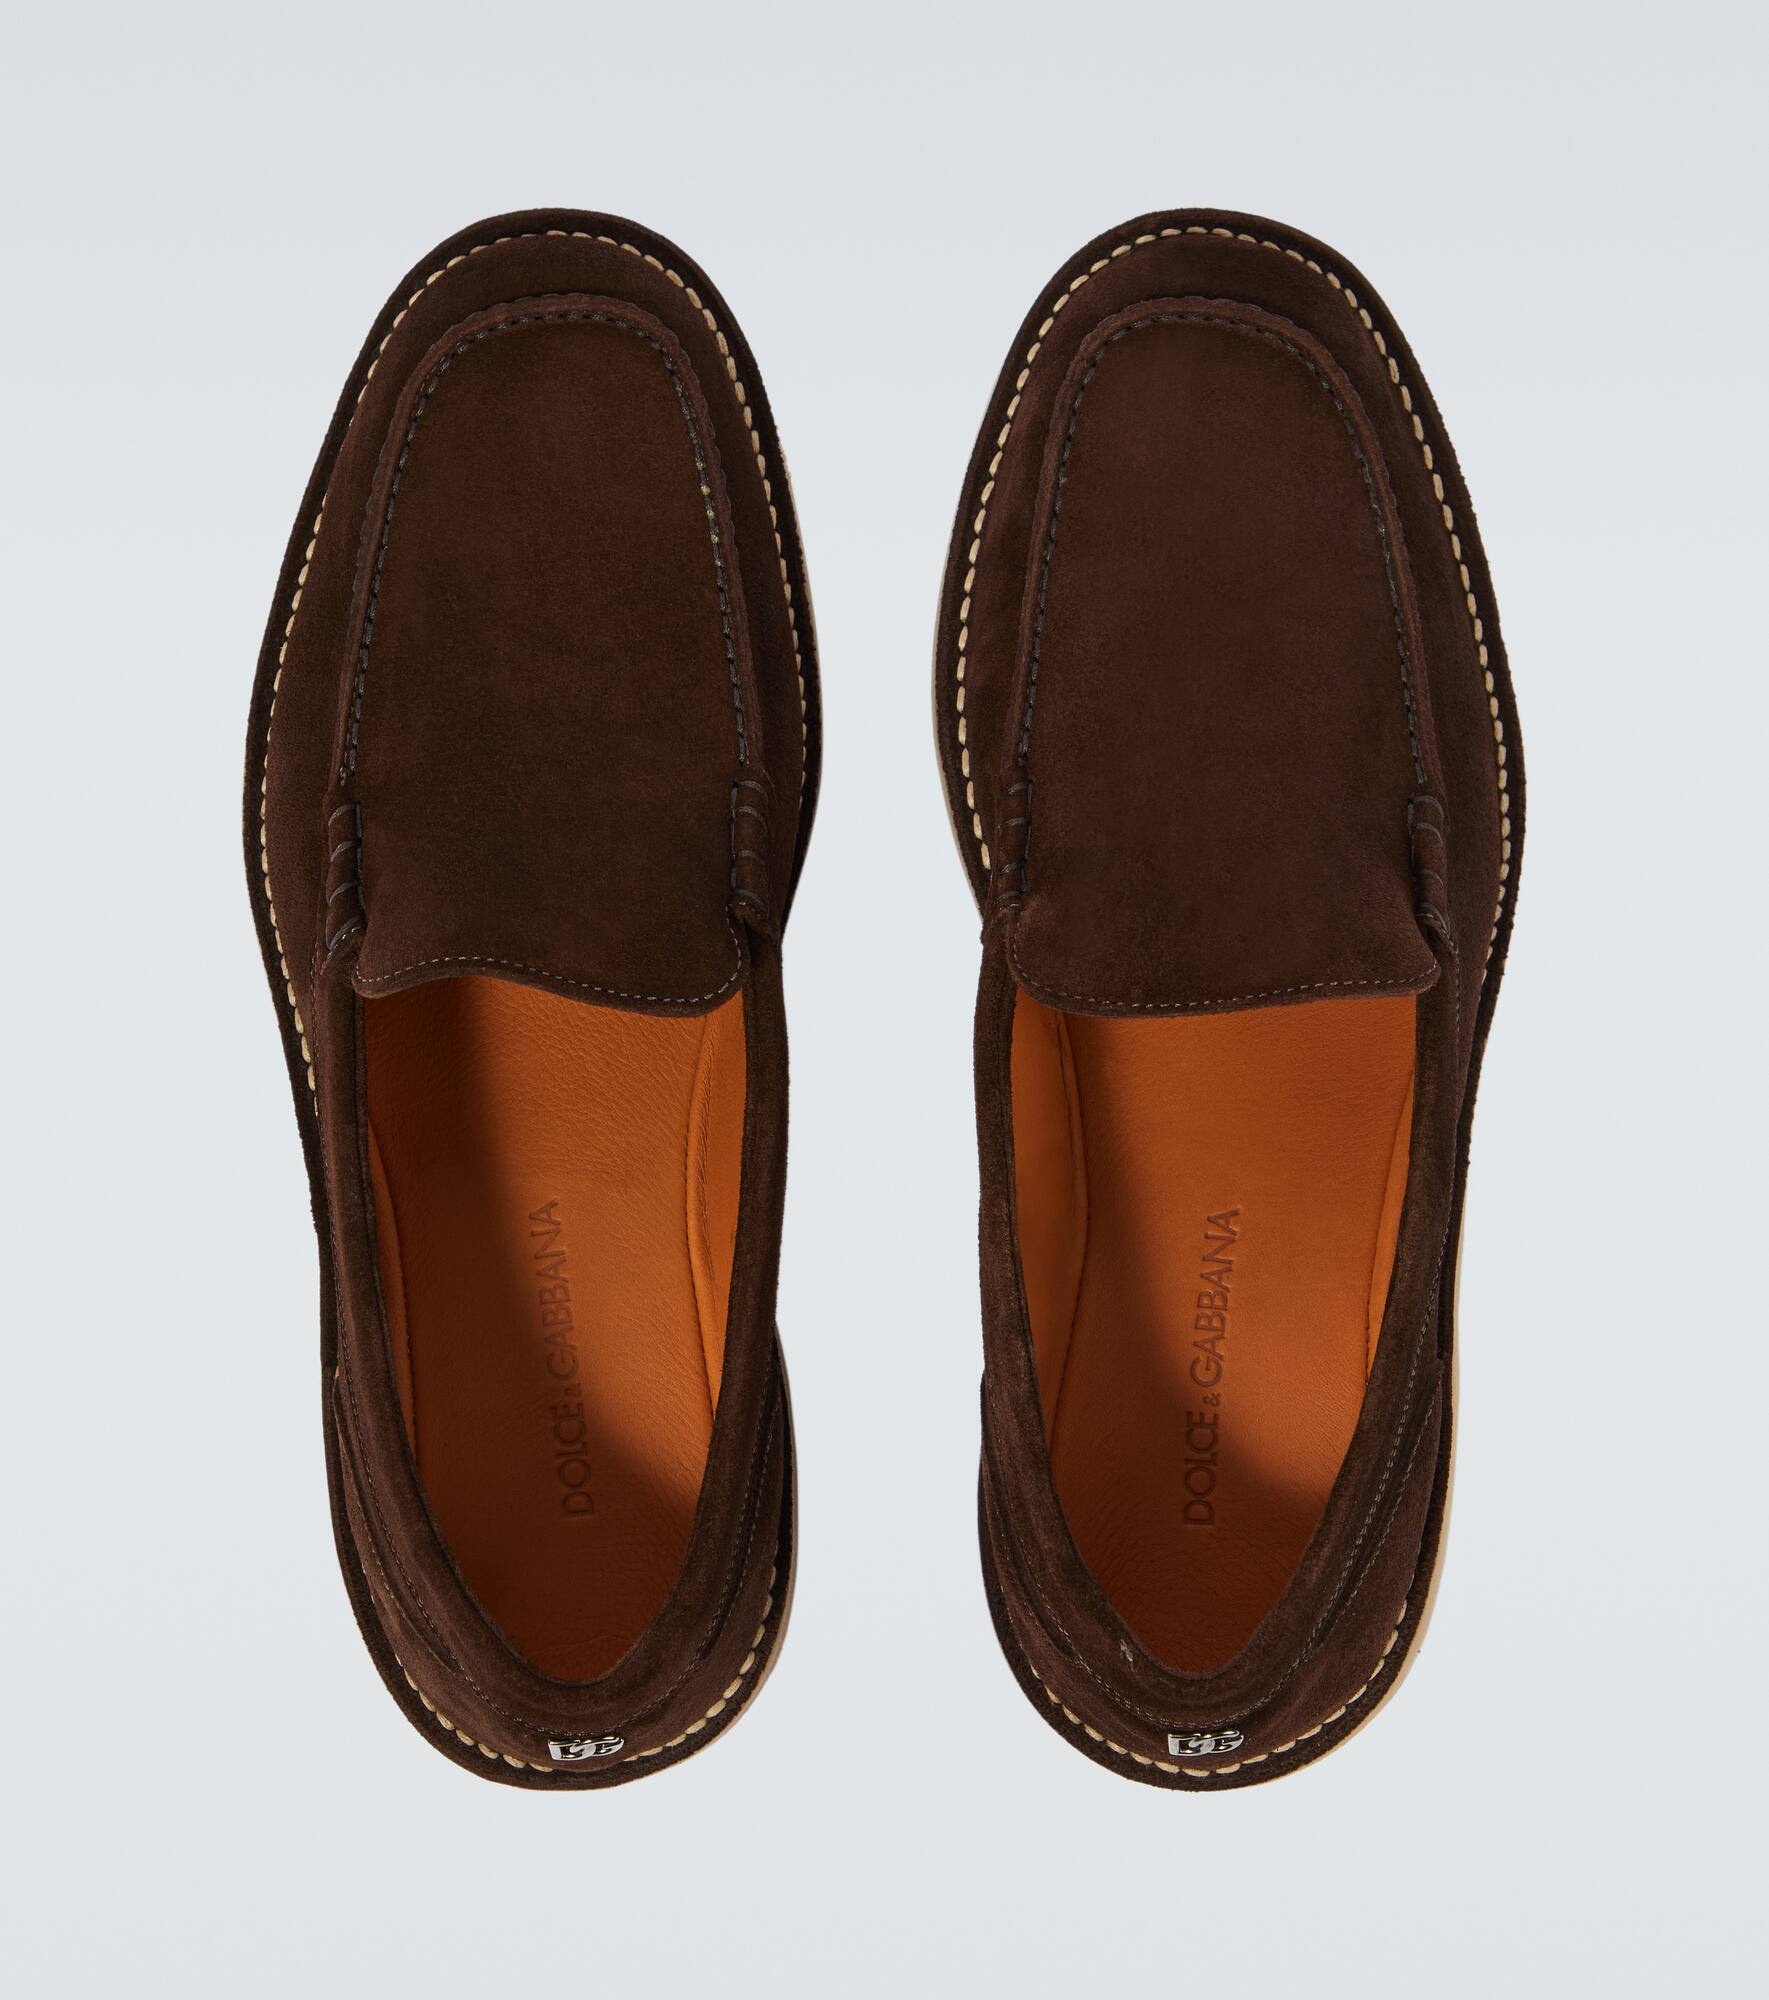 New Florio Ideal suede loafers - 4